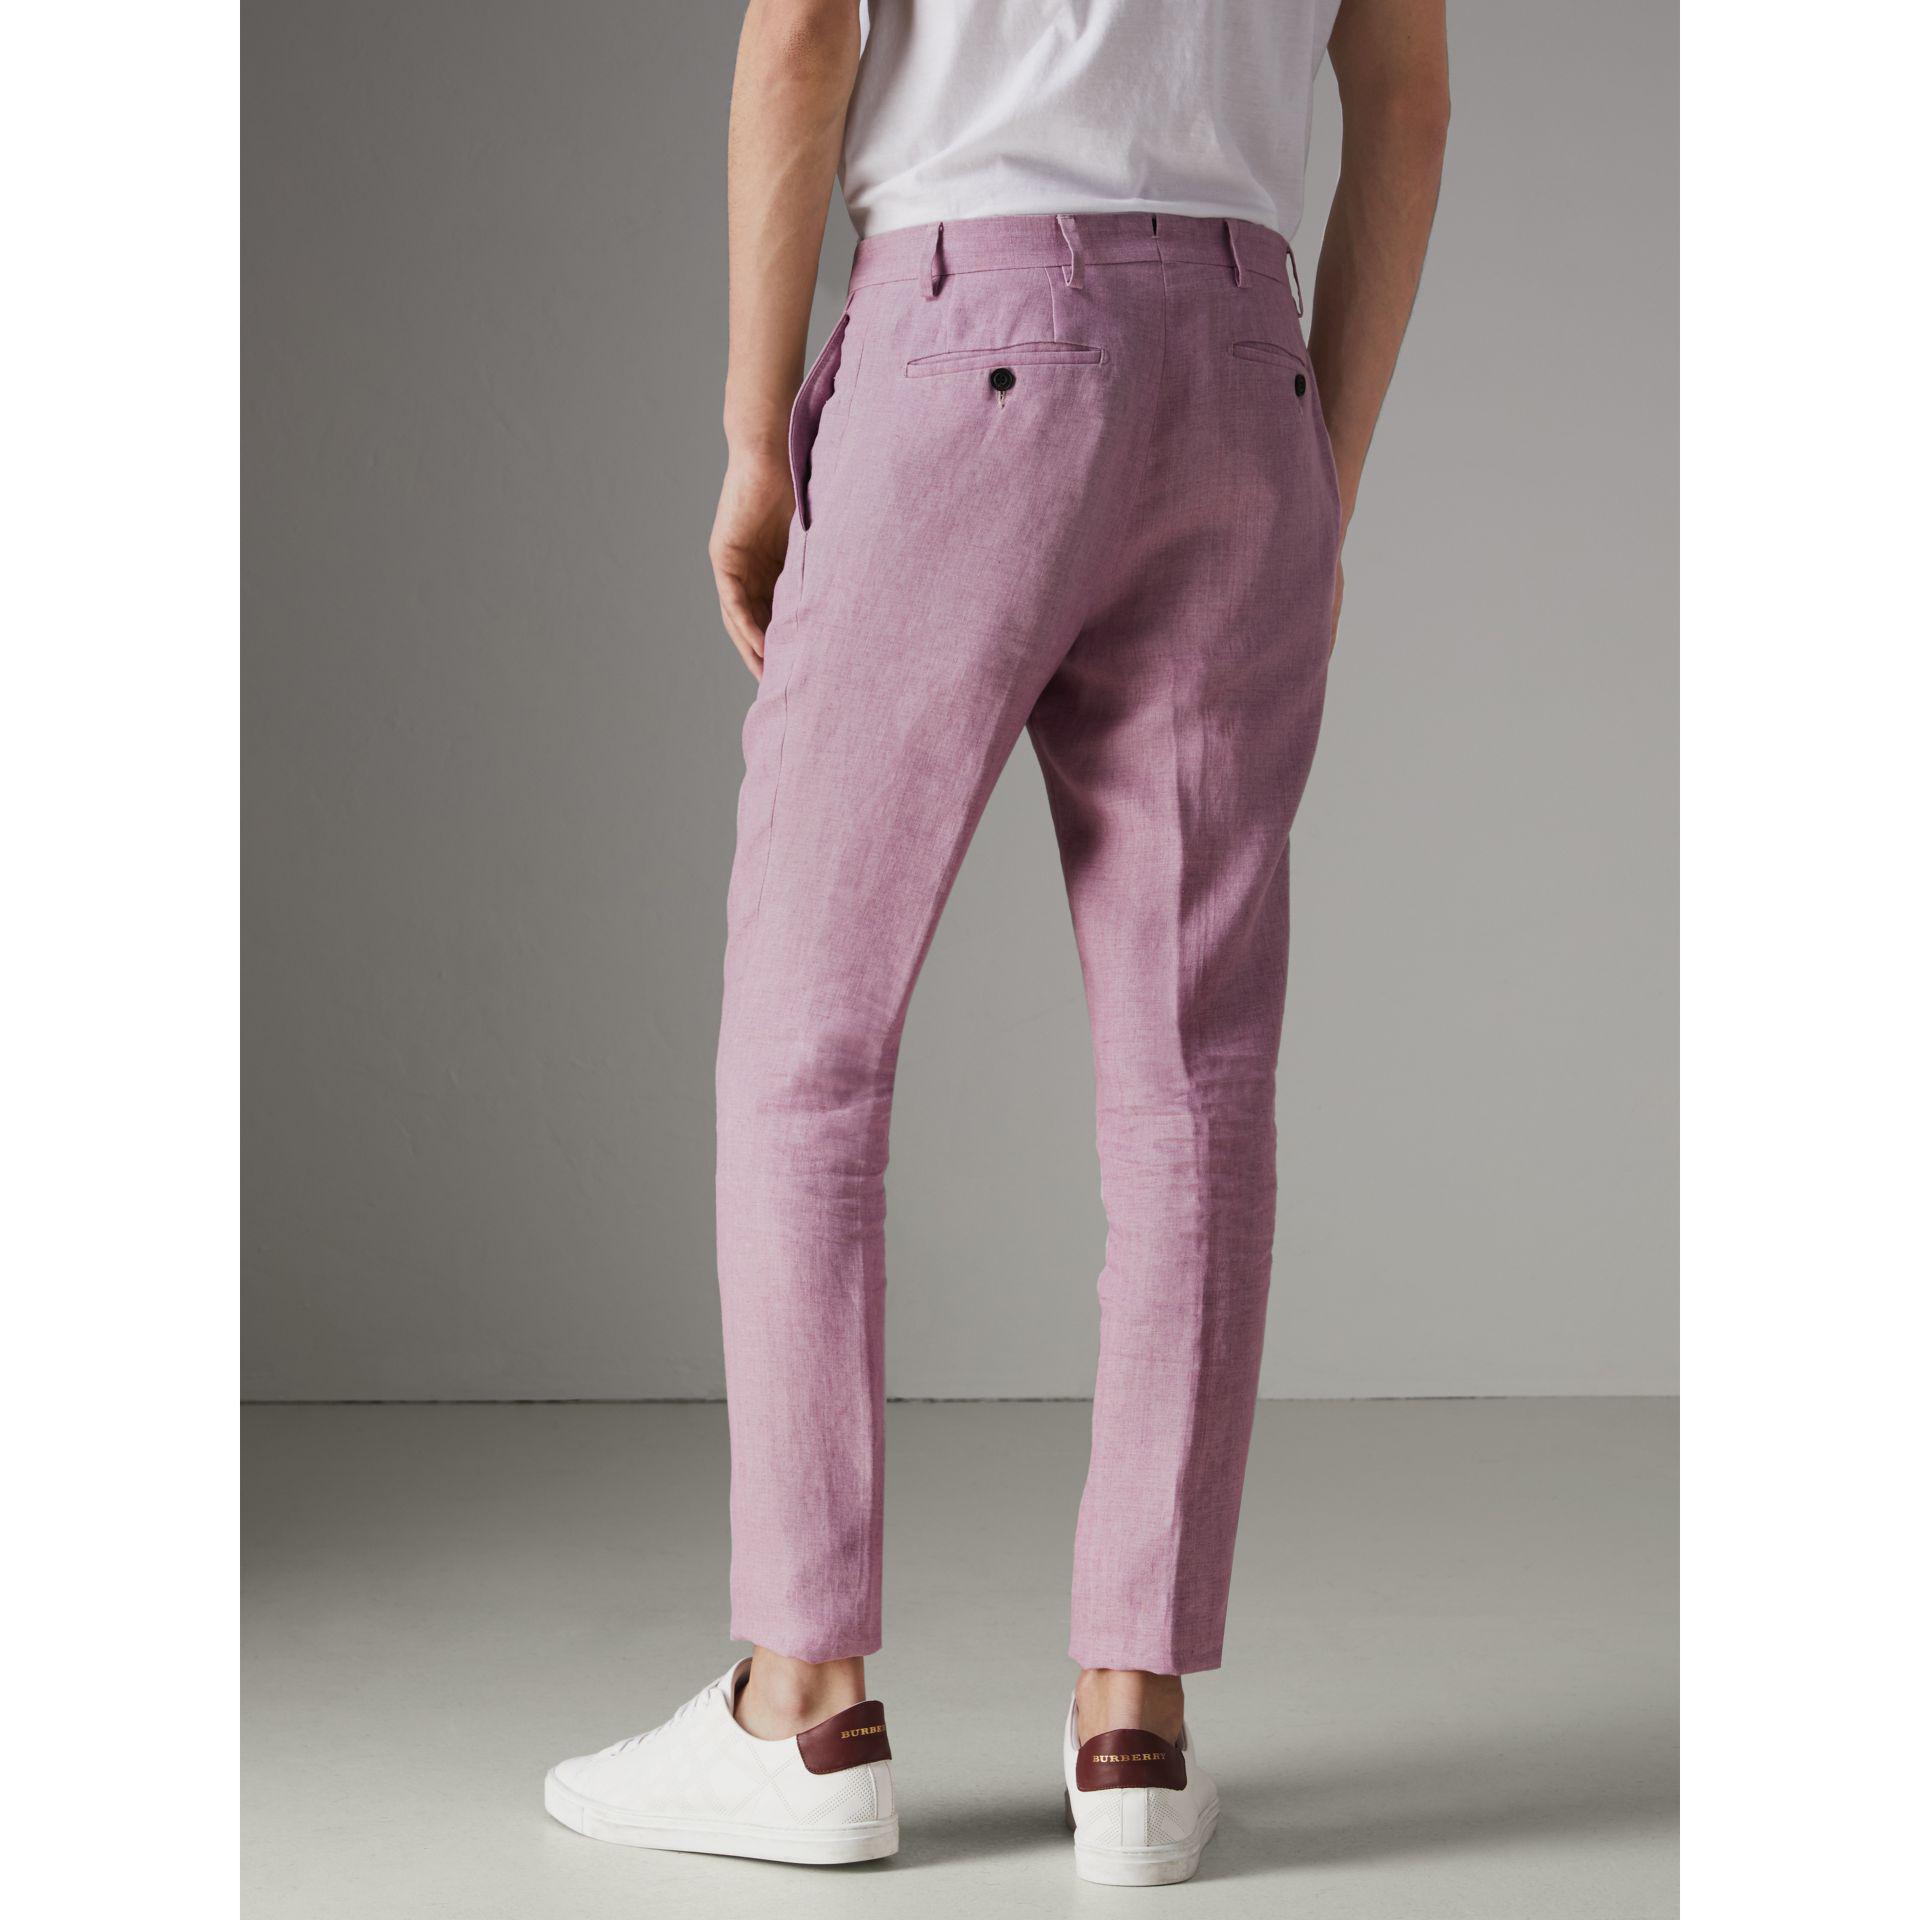 Burberry Soho Fit Linen Trousers in Pink Heather (Pink) for Men - Lyst